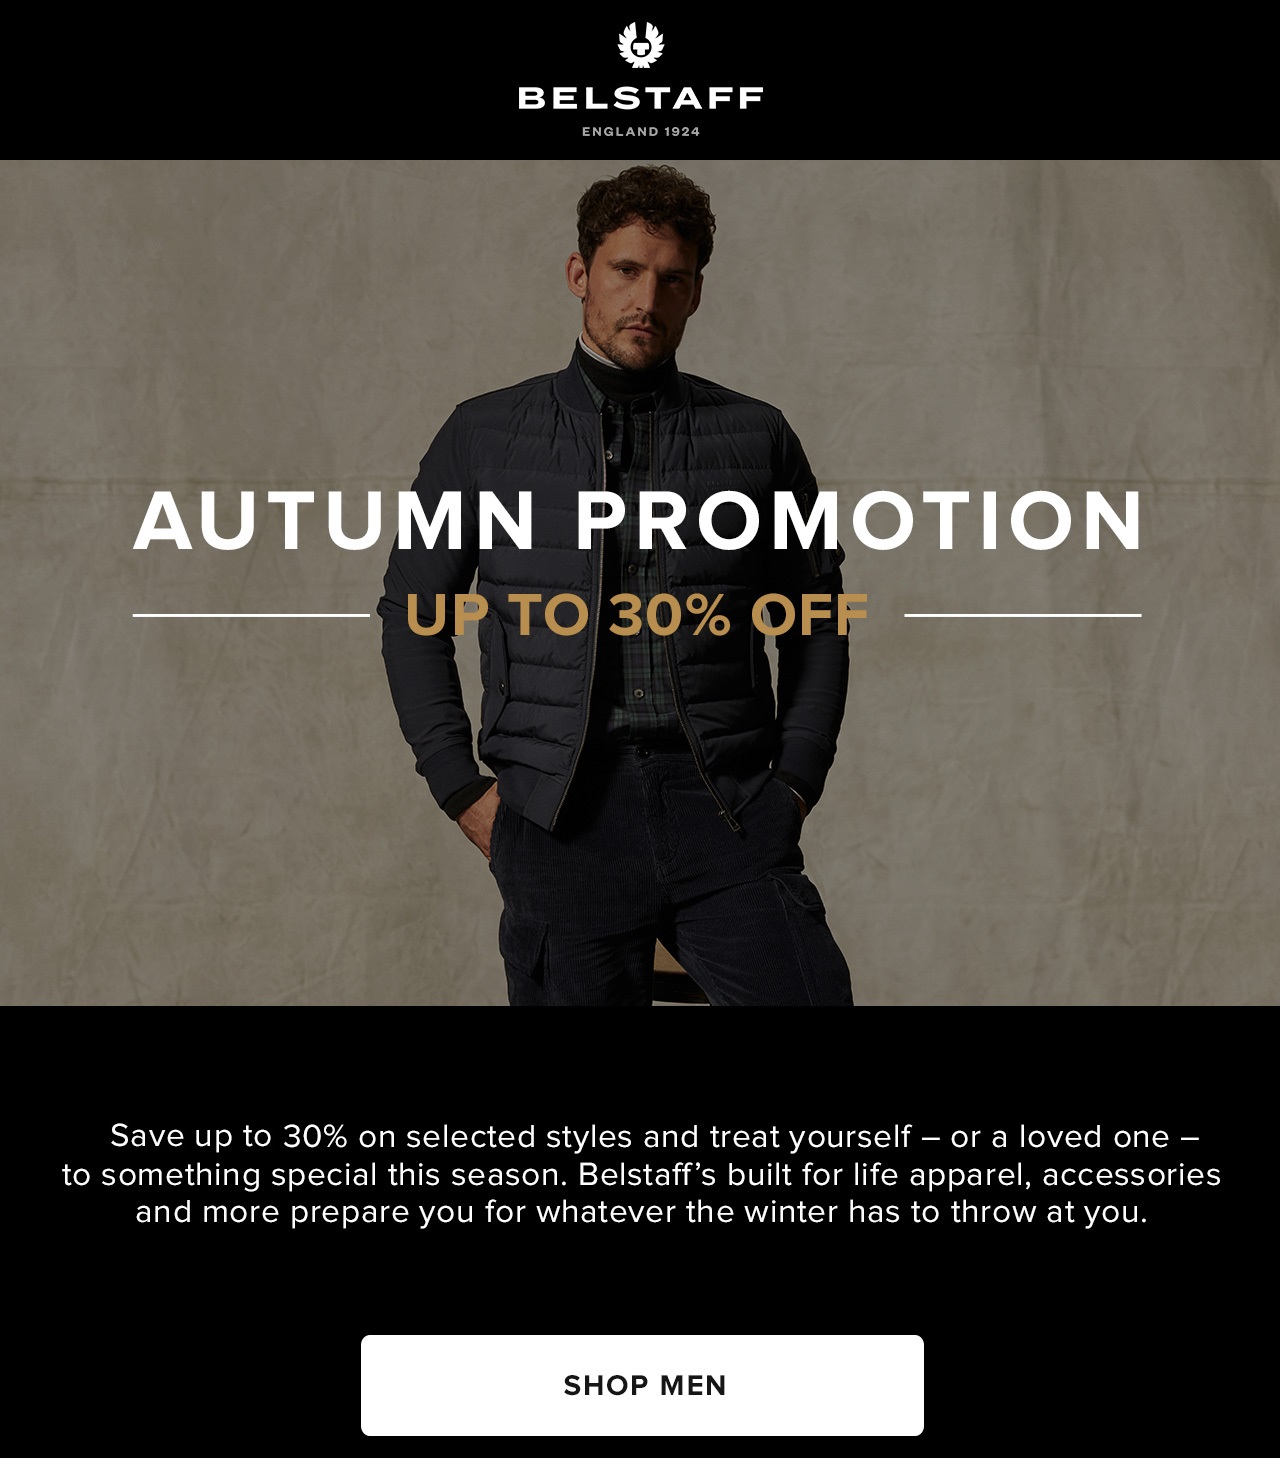 Save up to a 30% on selected styles and treat yourself - or a loved one - to something special this season. Belstaff's built for life apparel, accessories and more prepare you for whatever the winter has to throw at you.